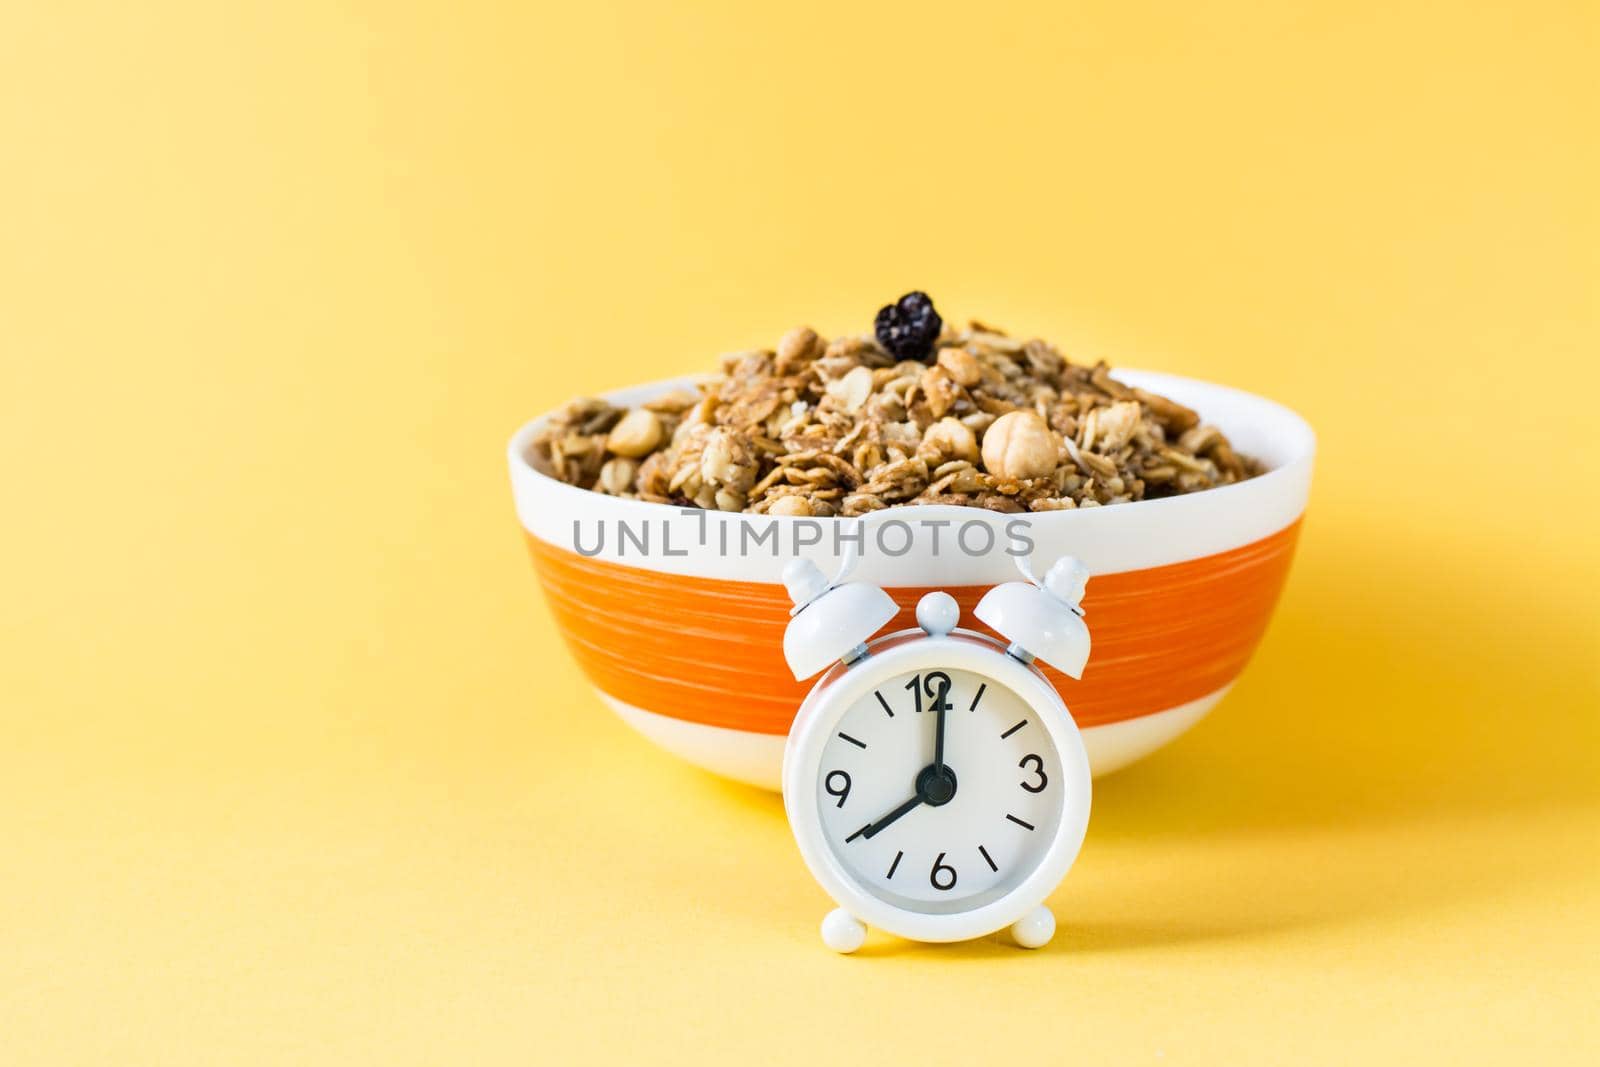 Healthy eating. Alarm clock in front of baked granola made from oats, nuts and raisins in a bowl on a yellow background by Aleruana